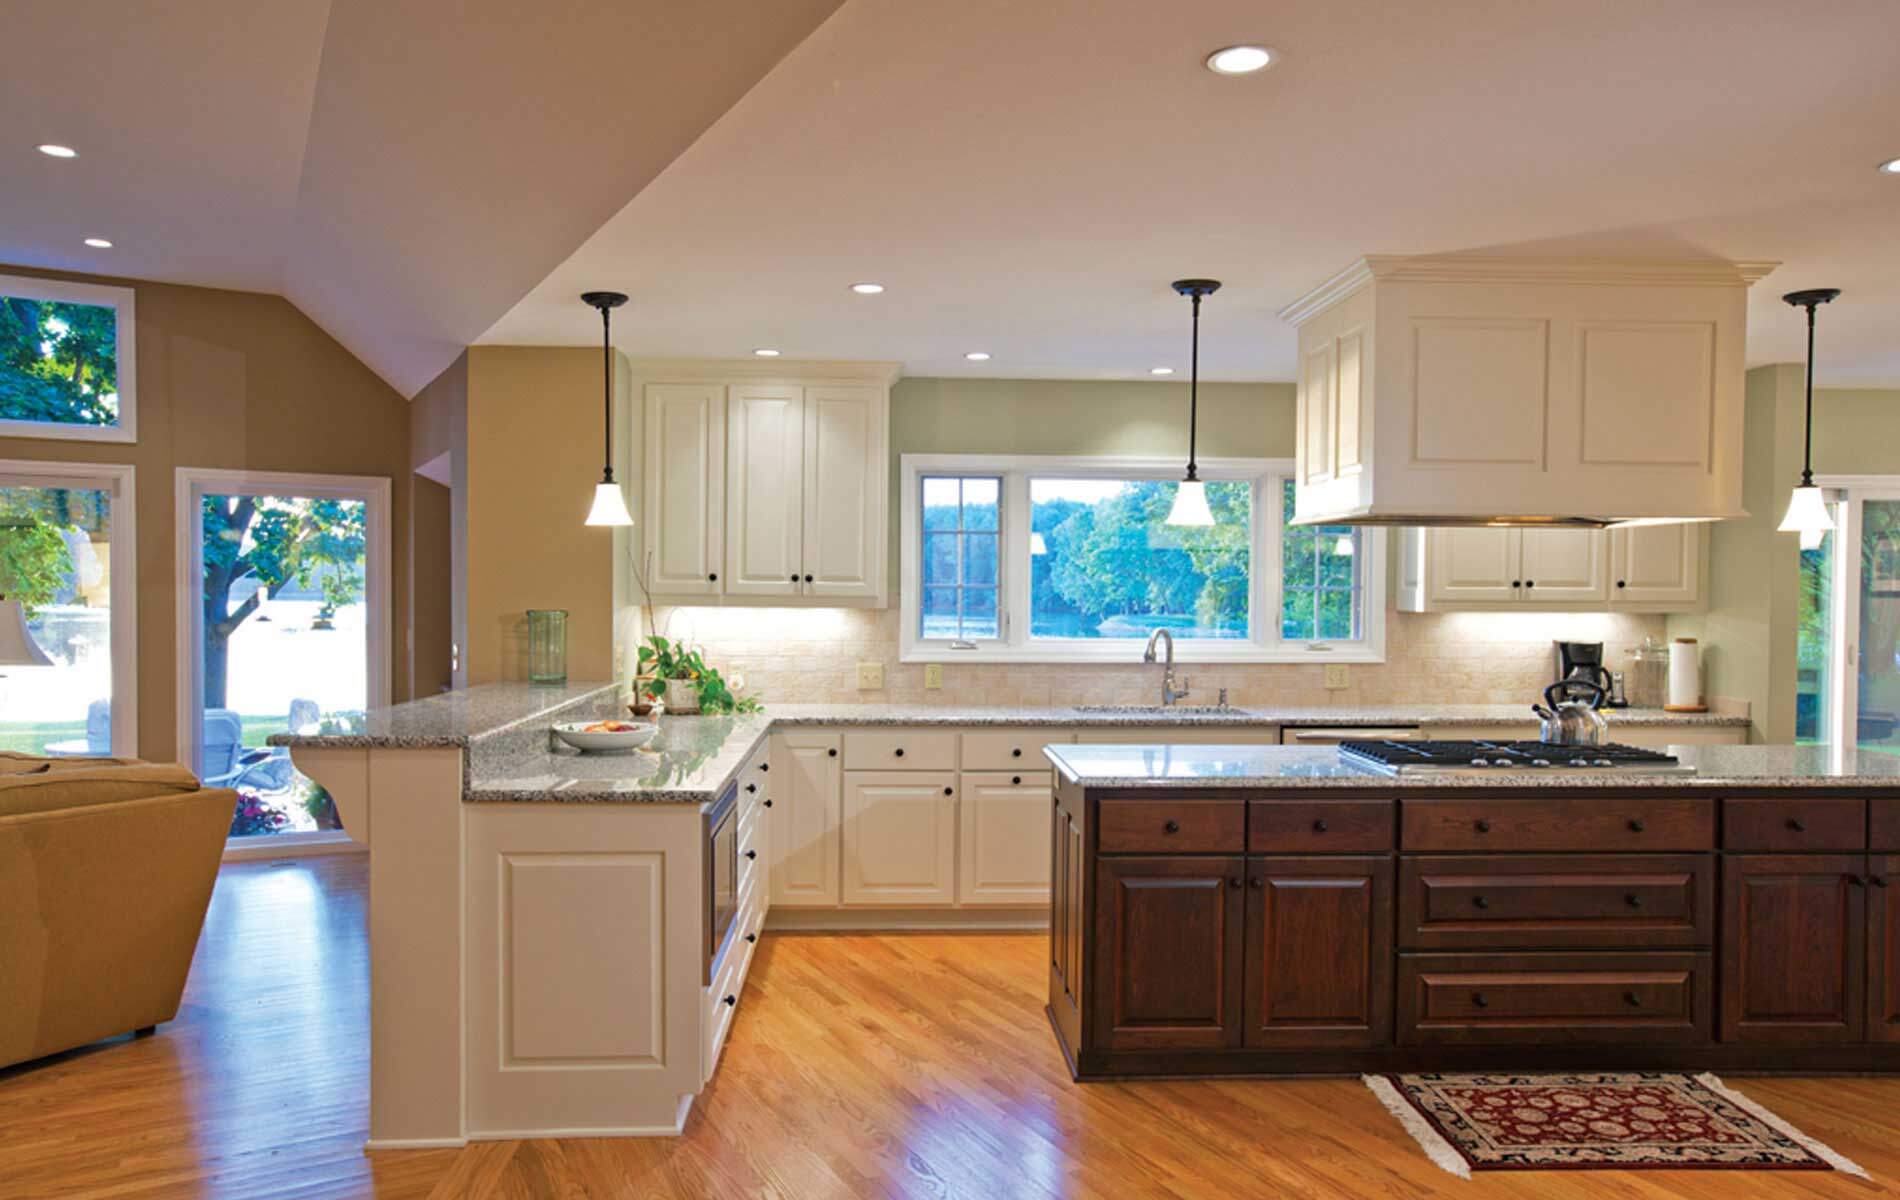 Wade Design | Home Remodel | Mequon